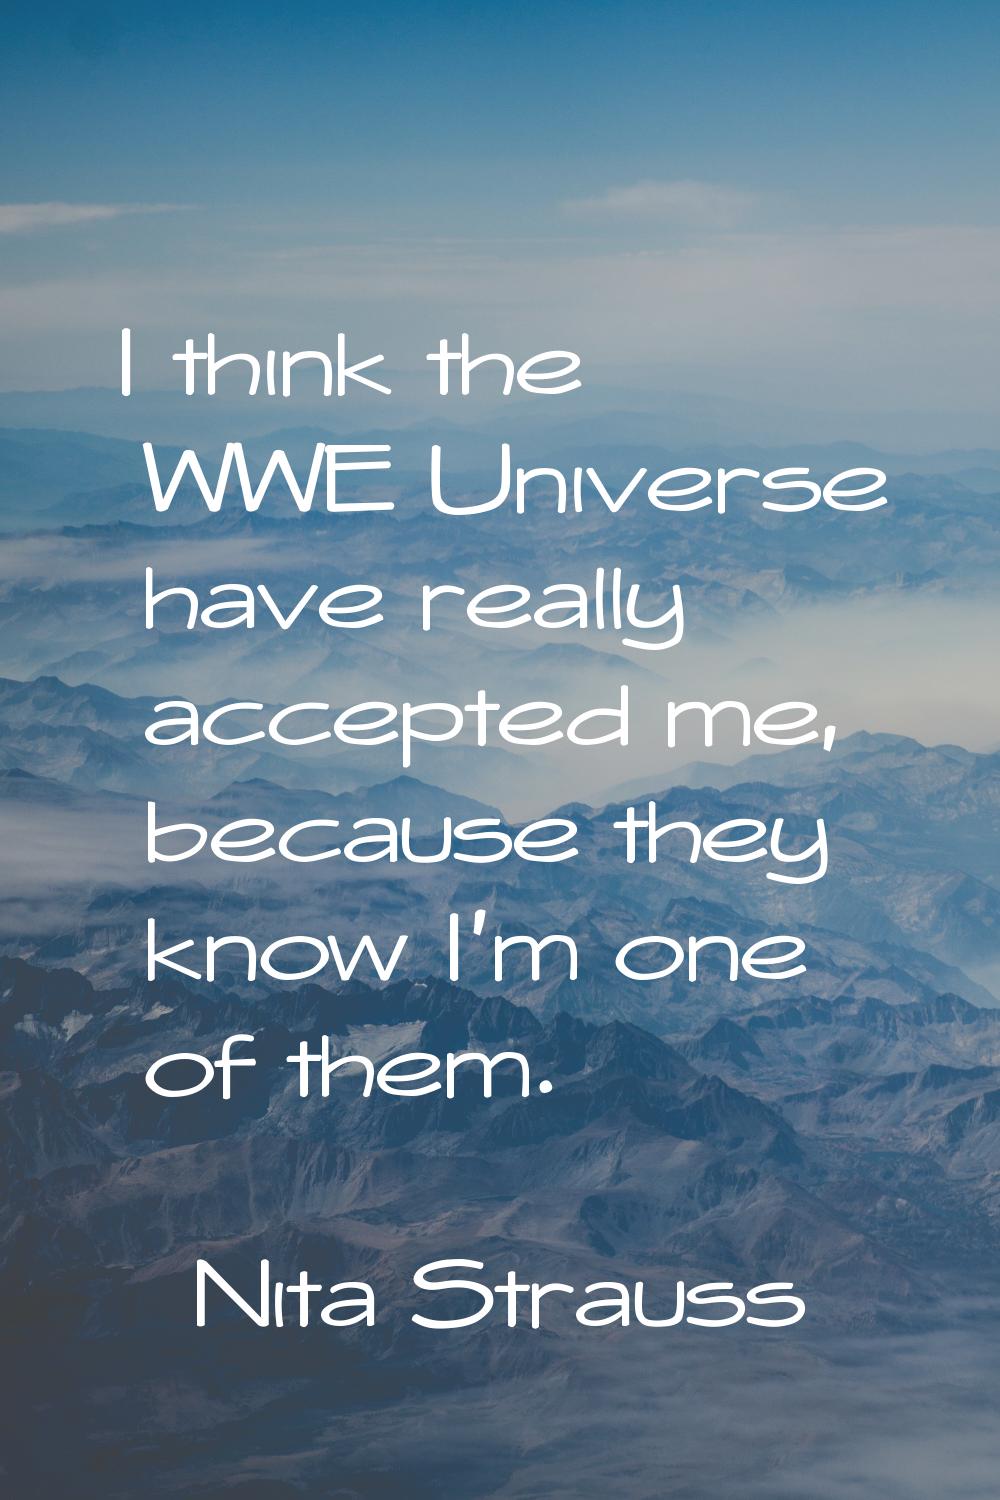 I think the WWE Universe have really accepted me, because they know I'm one of them.